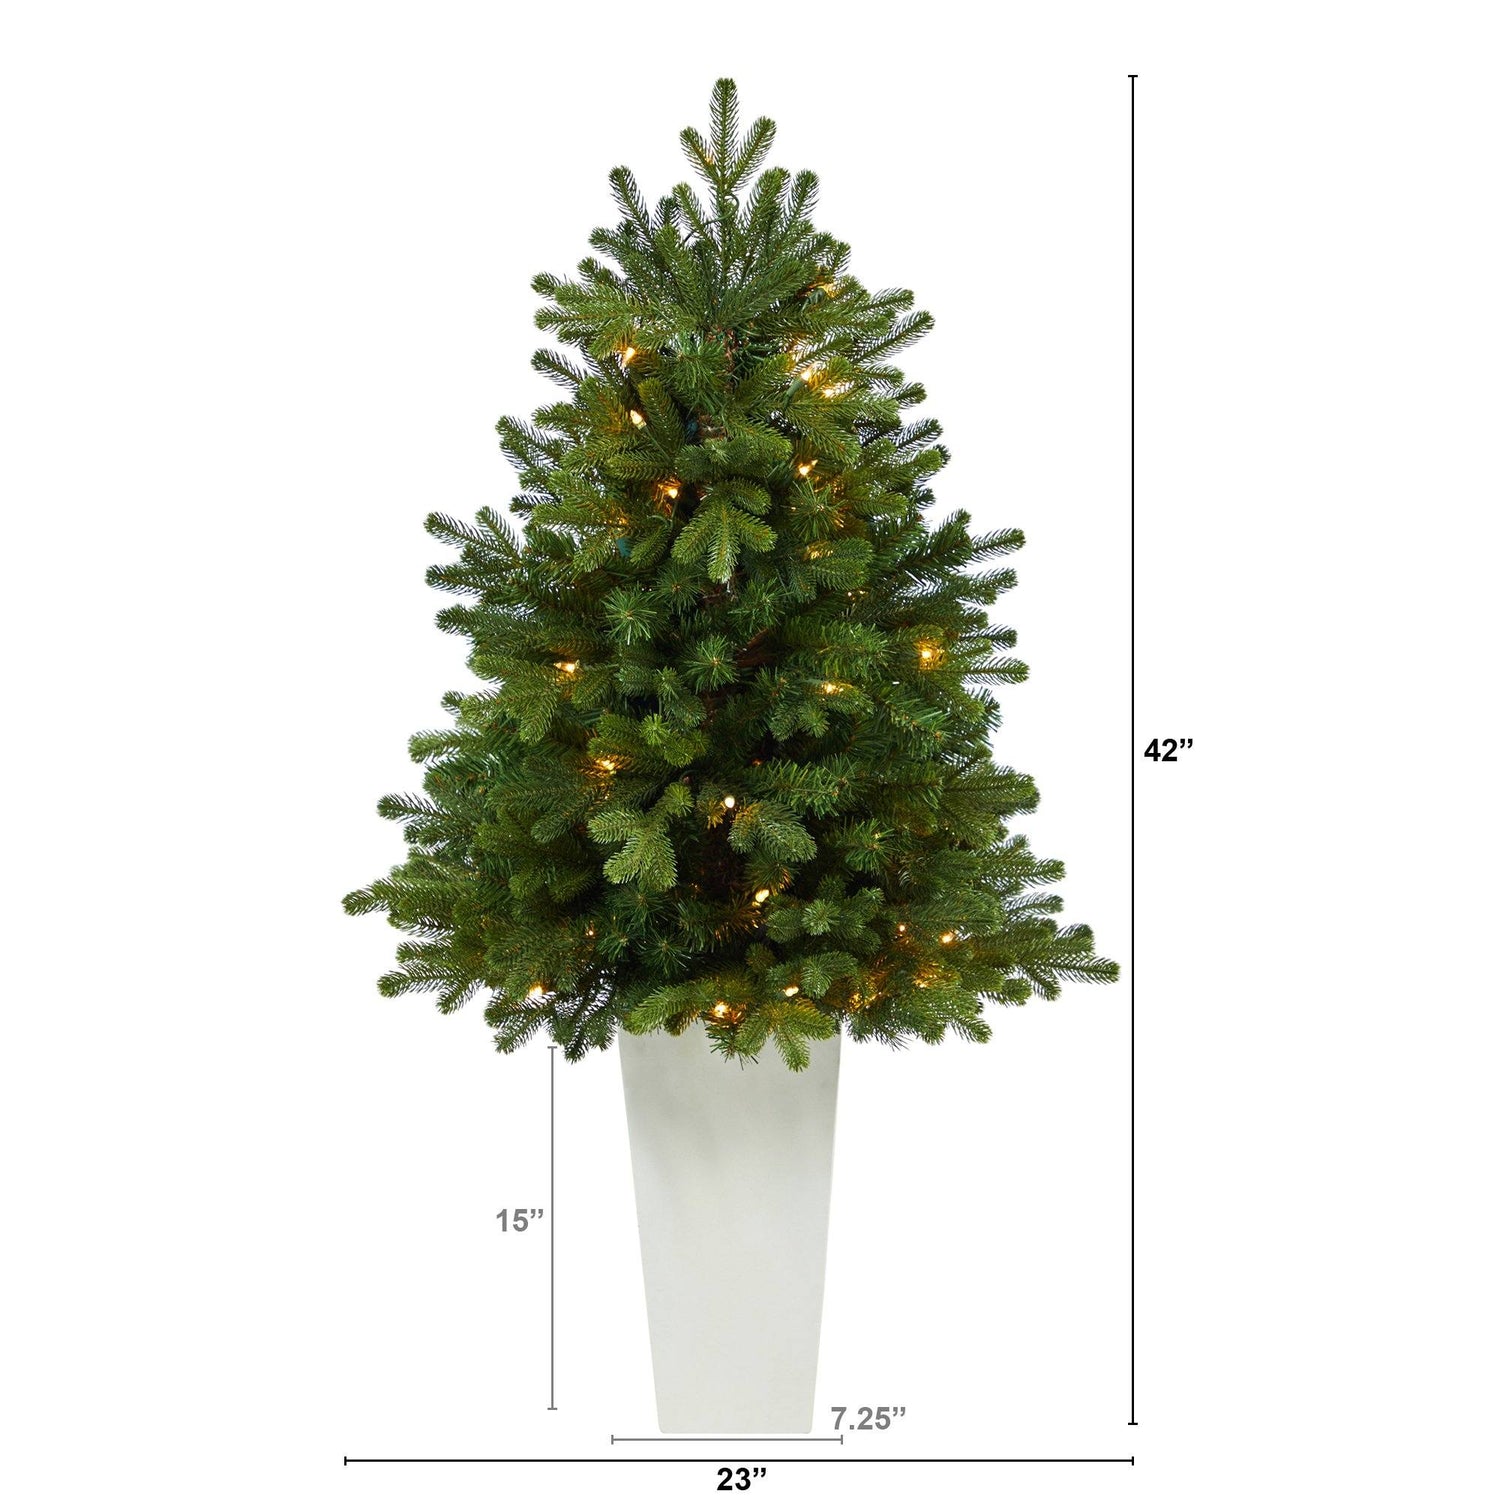 3.5’ Washington Fir Artificial Christmas Tree with 50 Clear Lights in Tower Planter